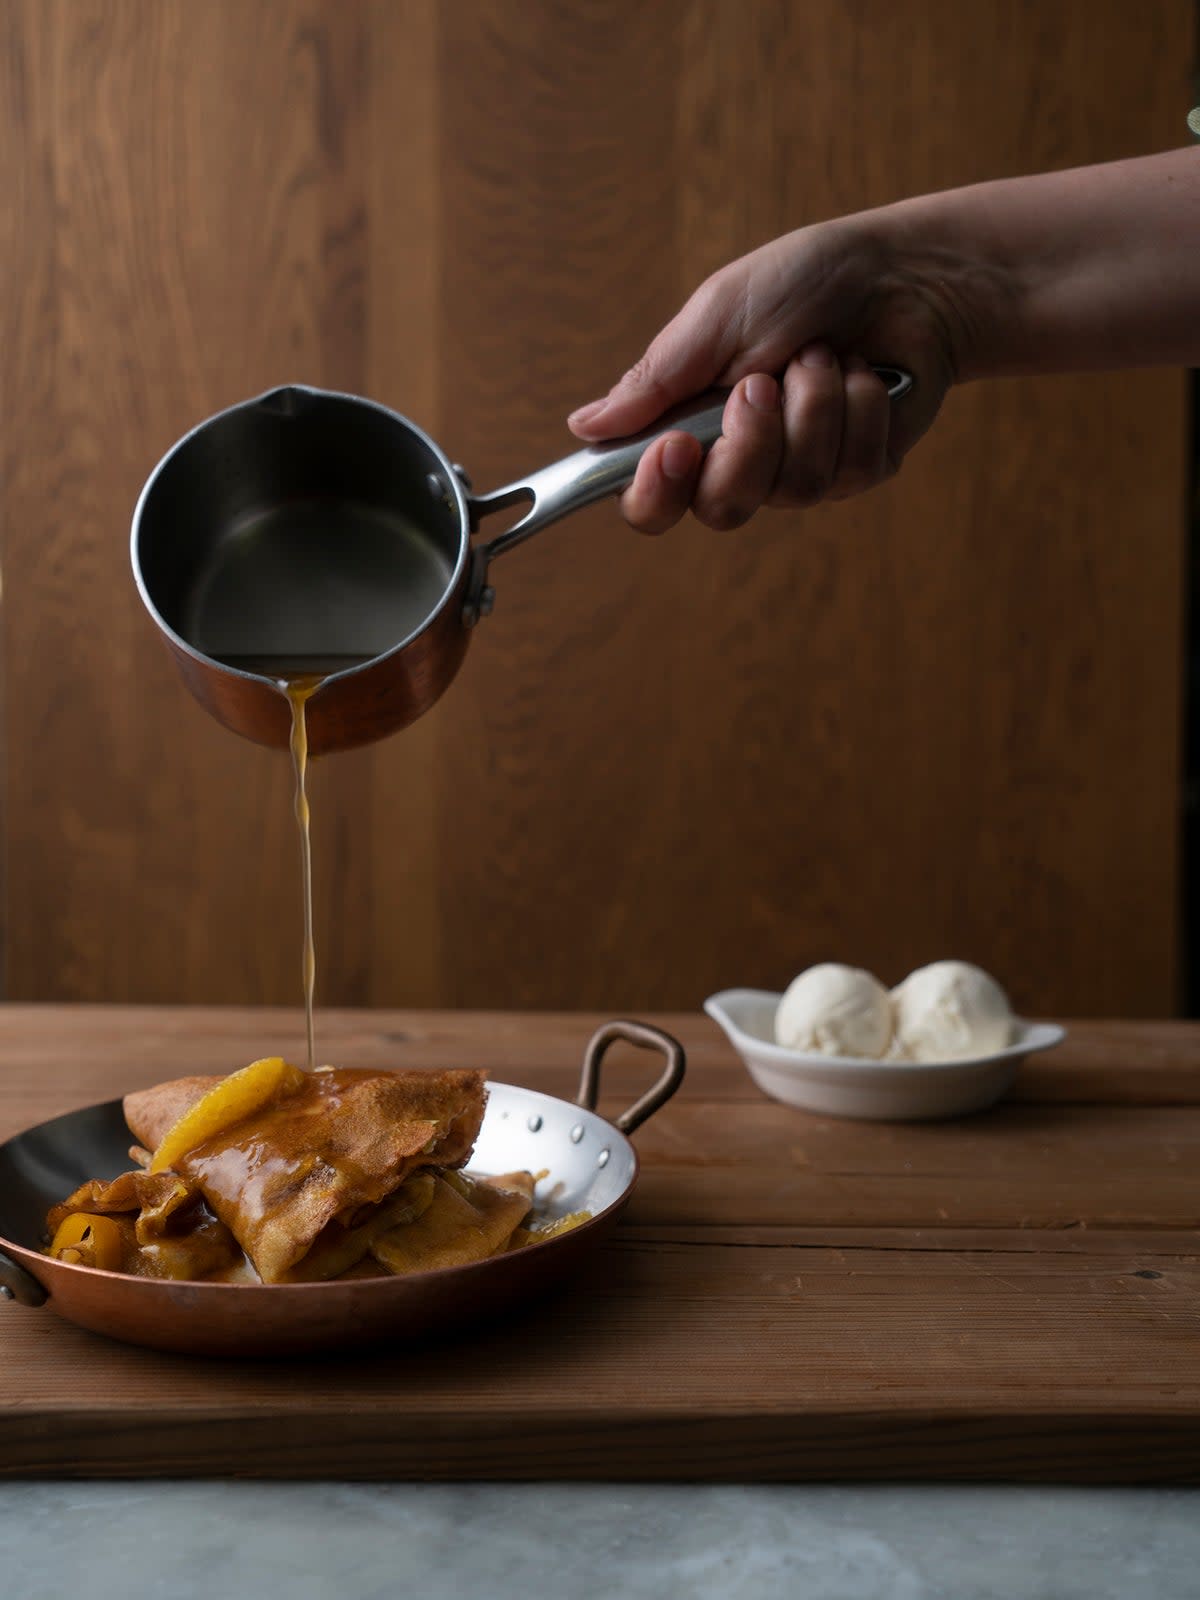 Crepes suzette were created by accident when a dessert caught fire (Natasha Sideris)